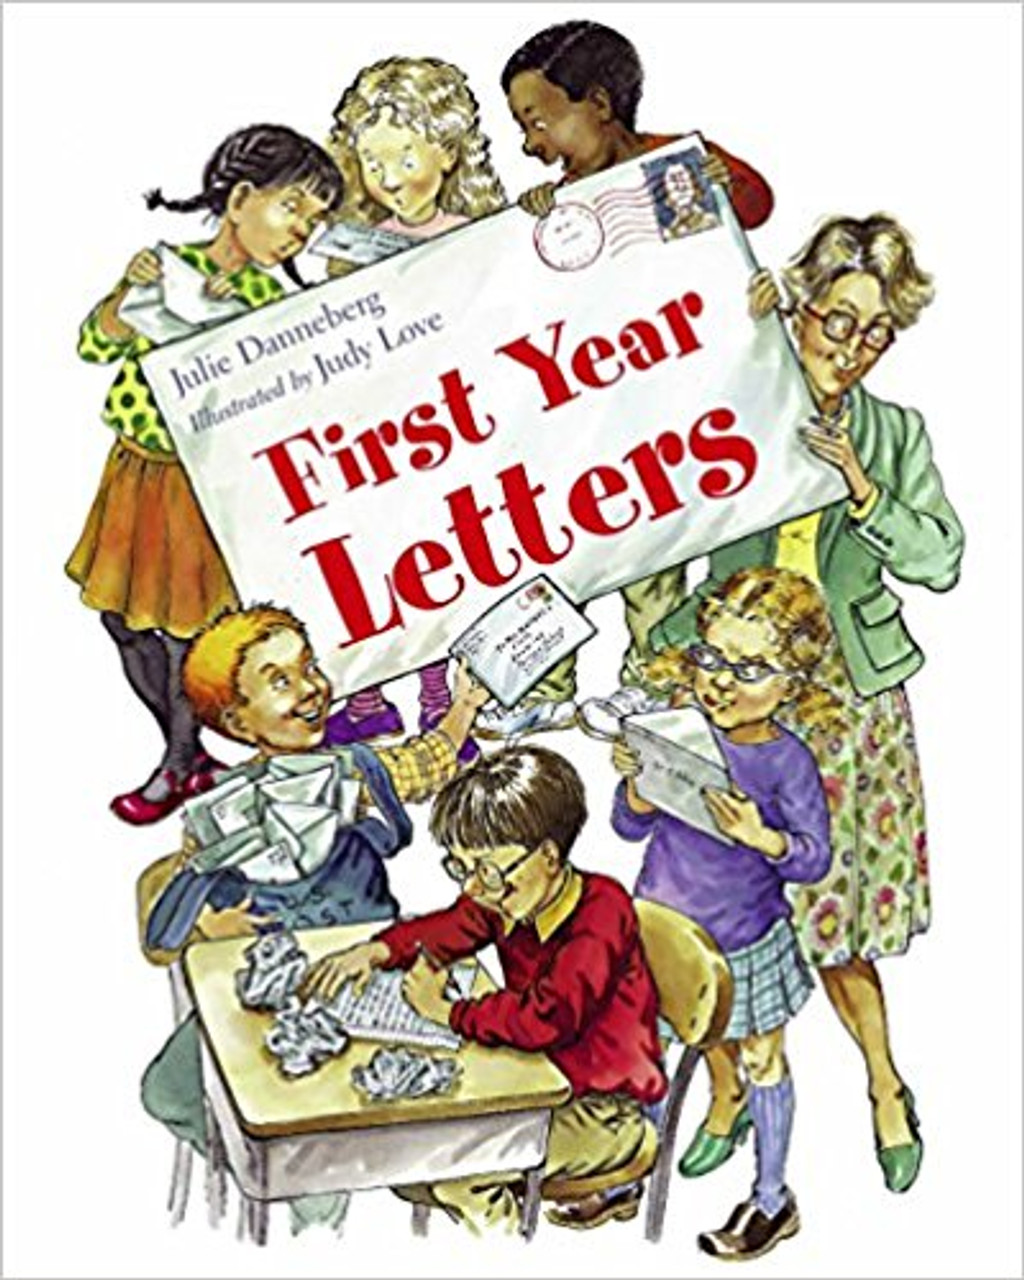 Mrs. Sarah Jane Hartwell delighted children in First Day Jitters. Now her class is learning to write letters for their classroom post office. Follow the class's humorous letters through the school year.